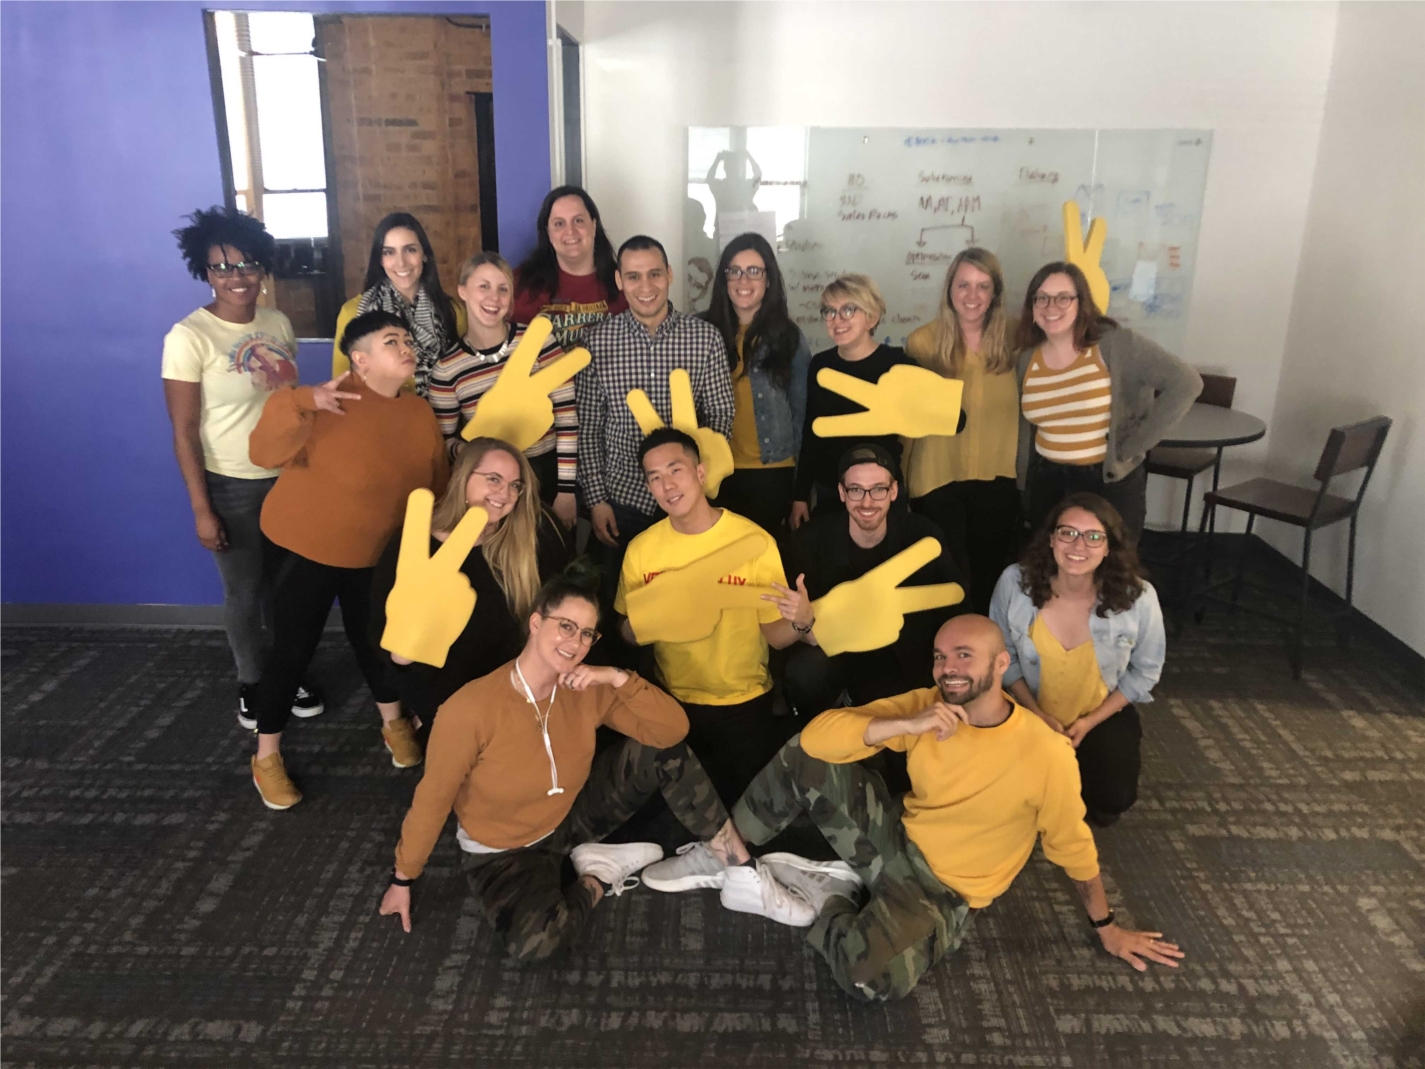 Chicago Design, Marketing, and Talent & Culture teams pose for a team member's last day before transferring to our San Francisco office (his favorite color is yellow!)